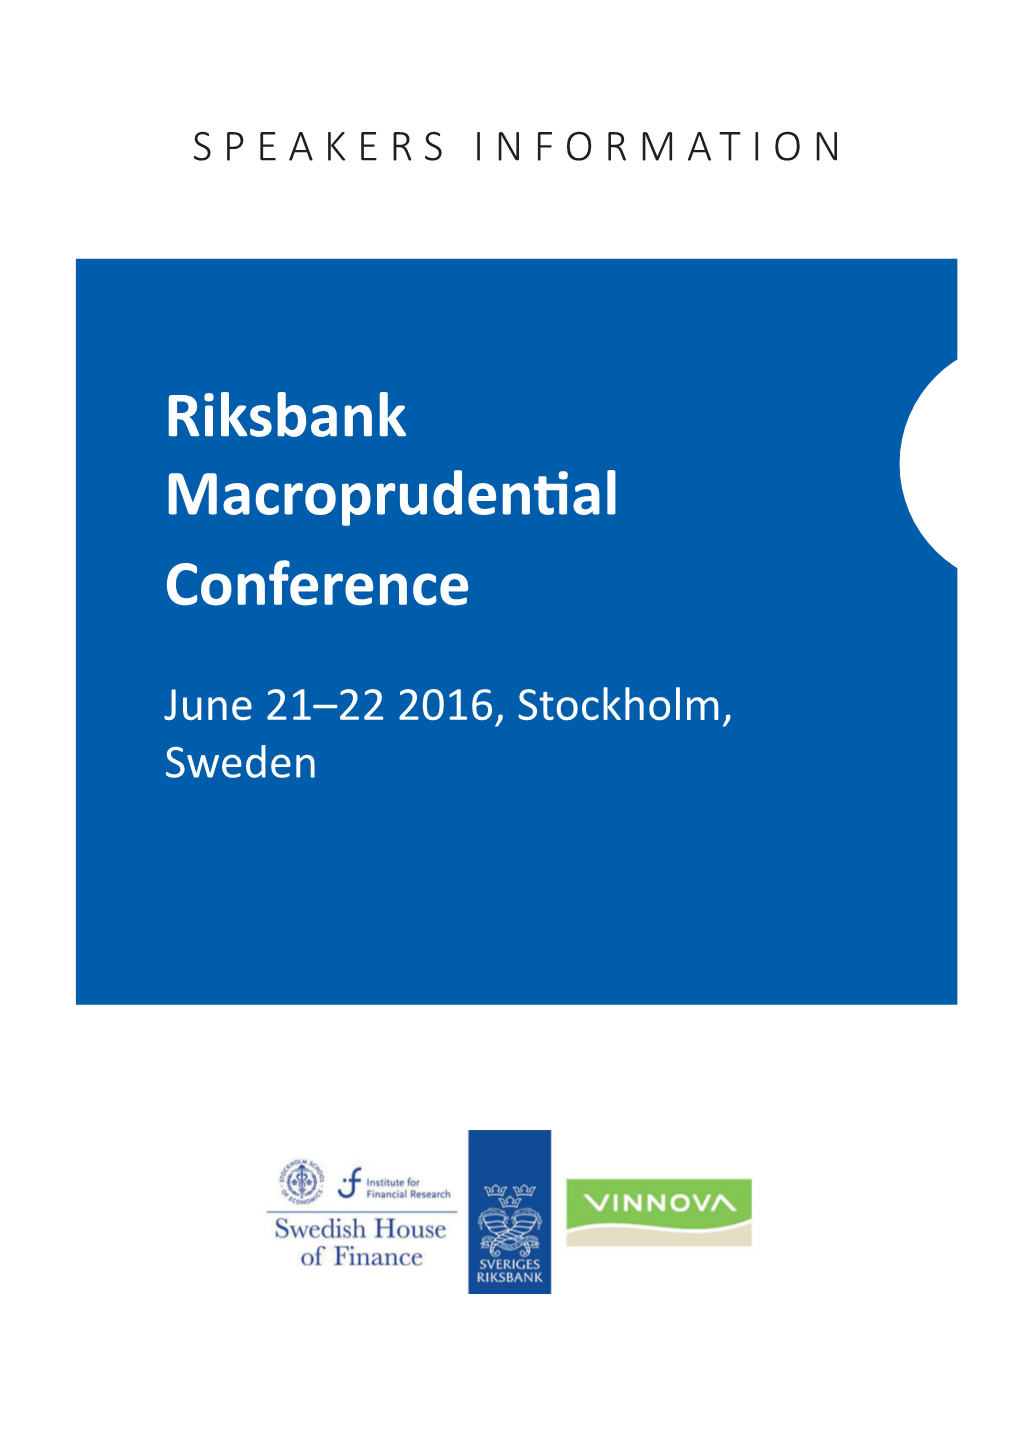 Riksbank Macroprudential Conference